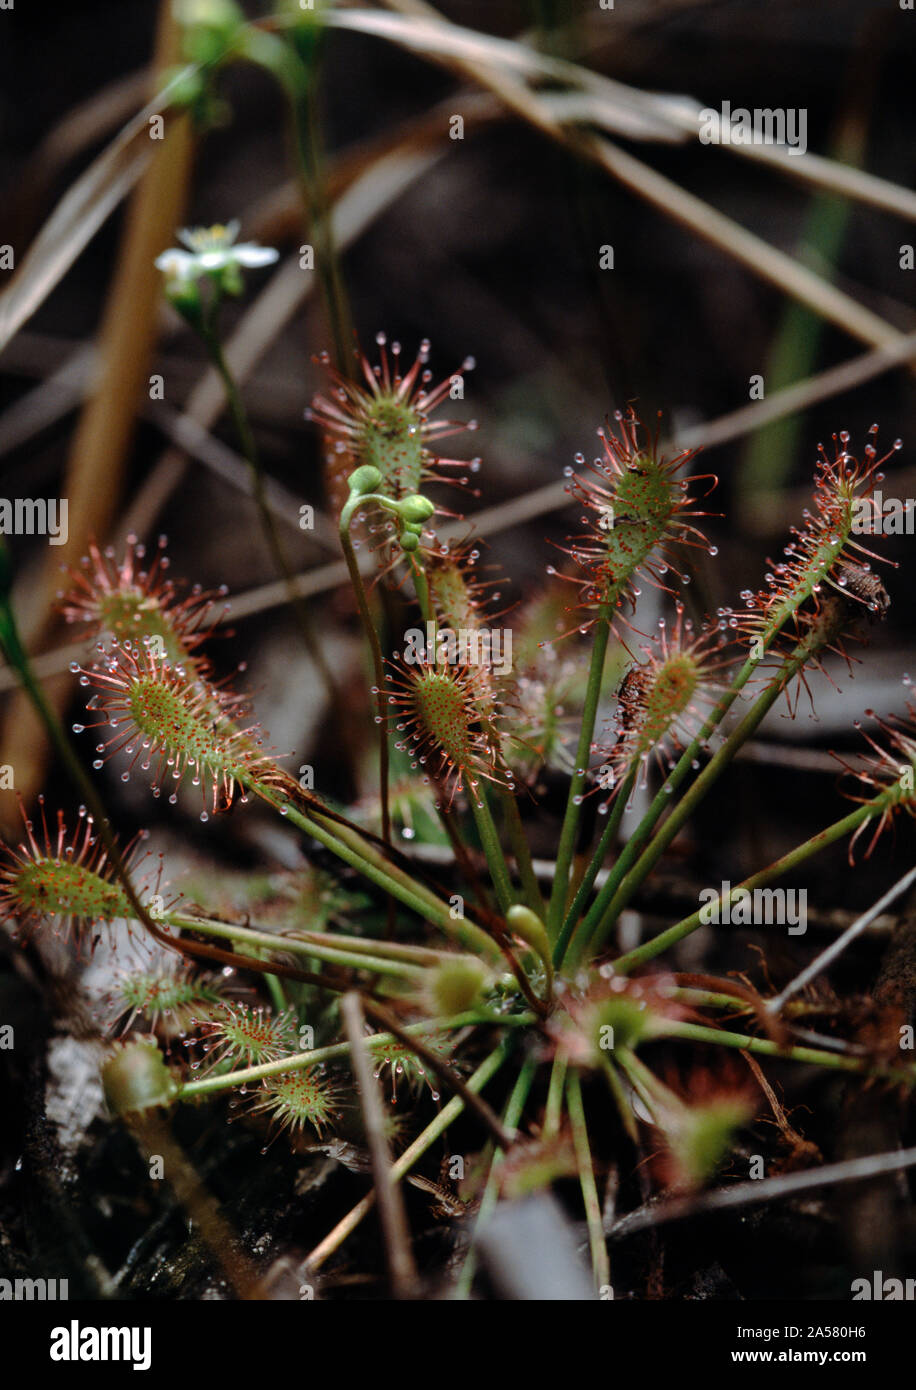 Carnivorous Drosera Plant High Resolution Stock Photography And Images Alamy